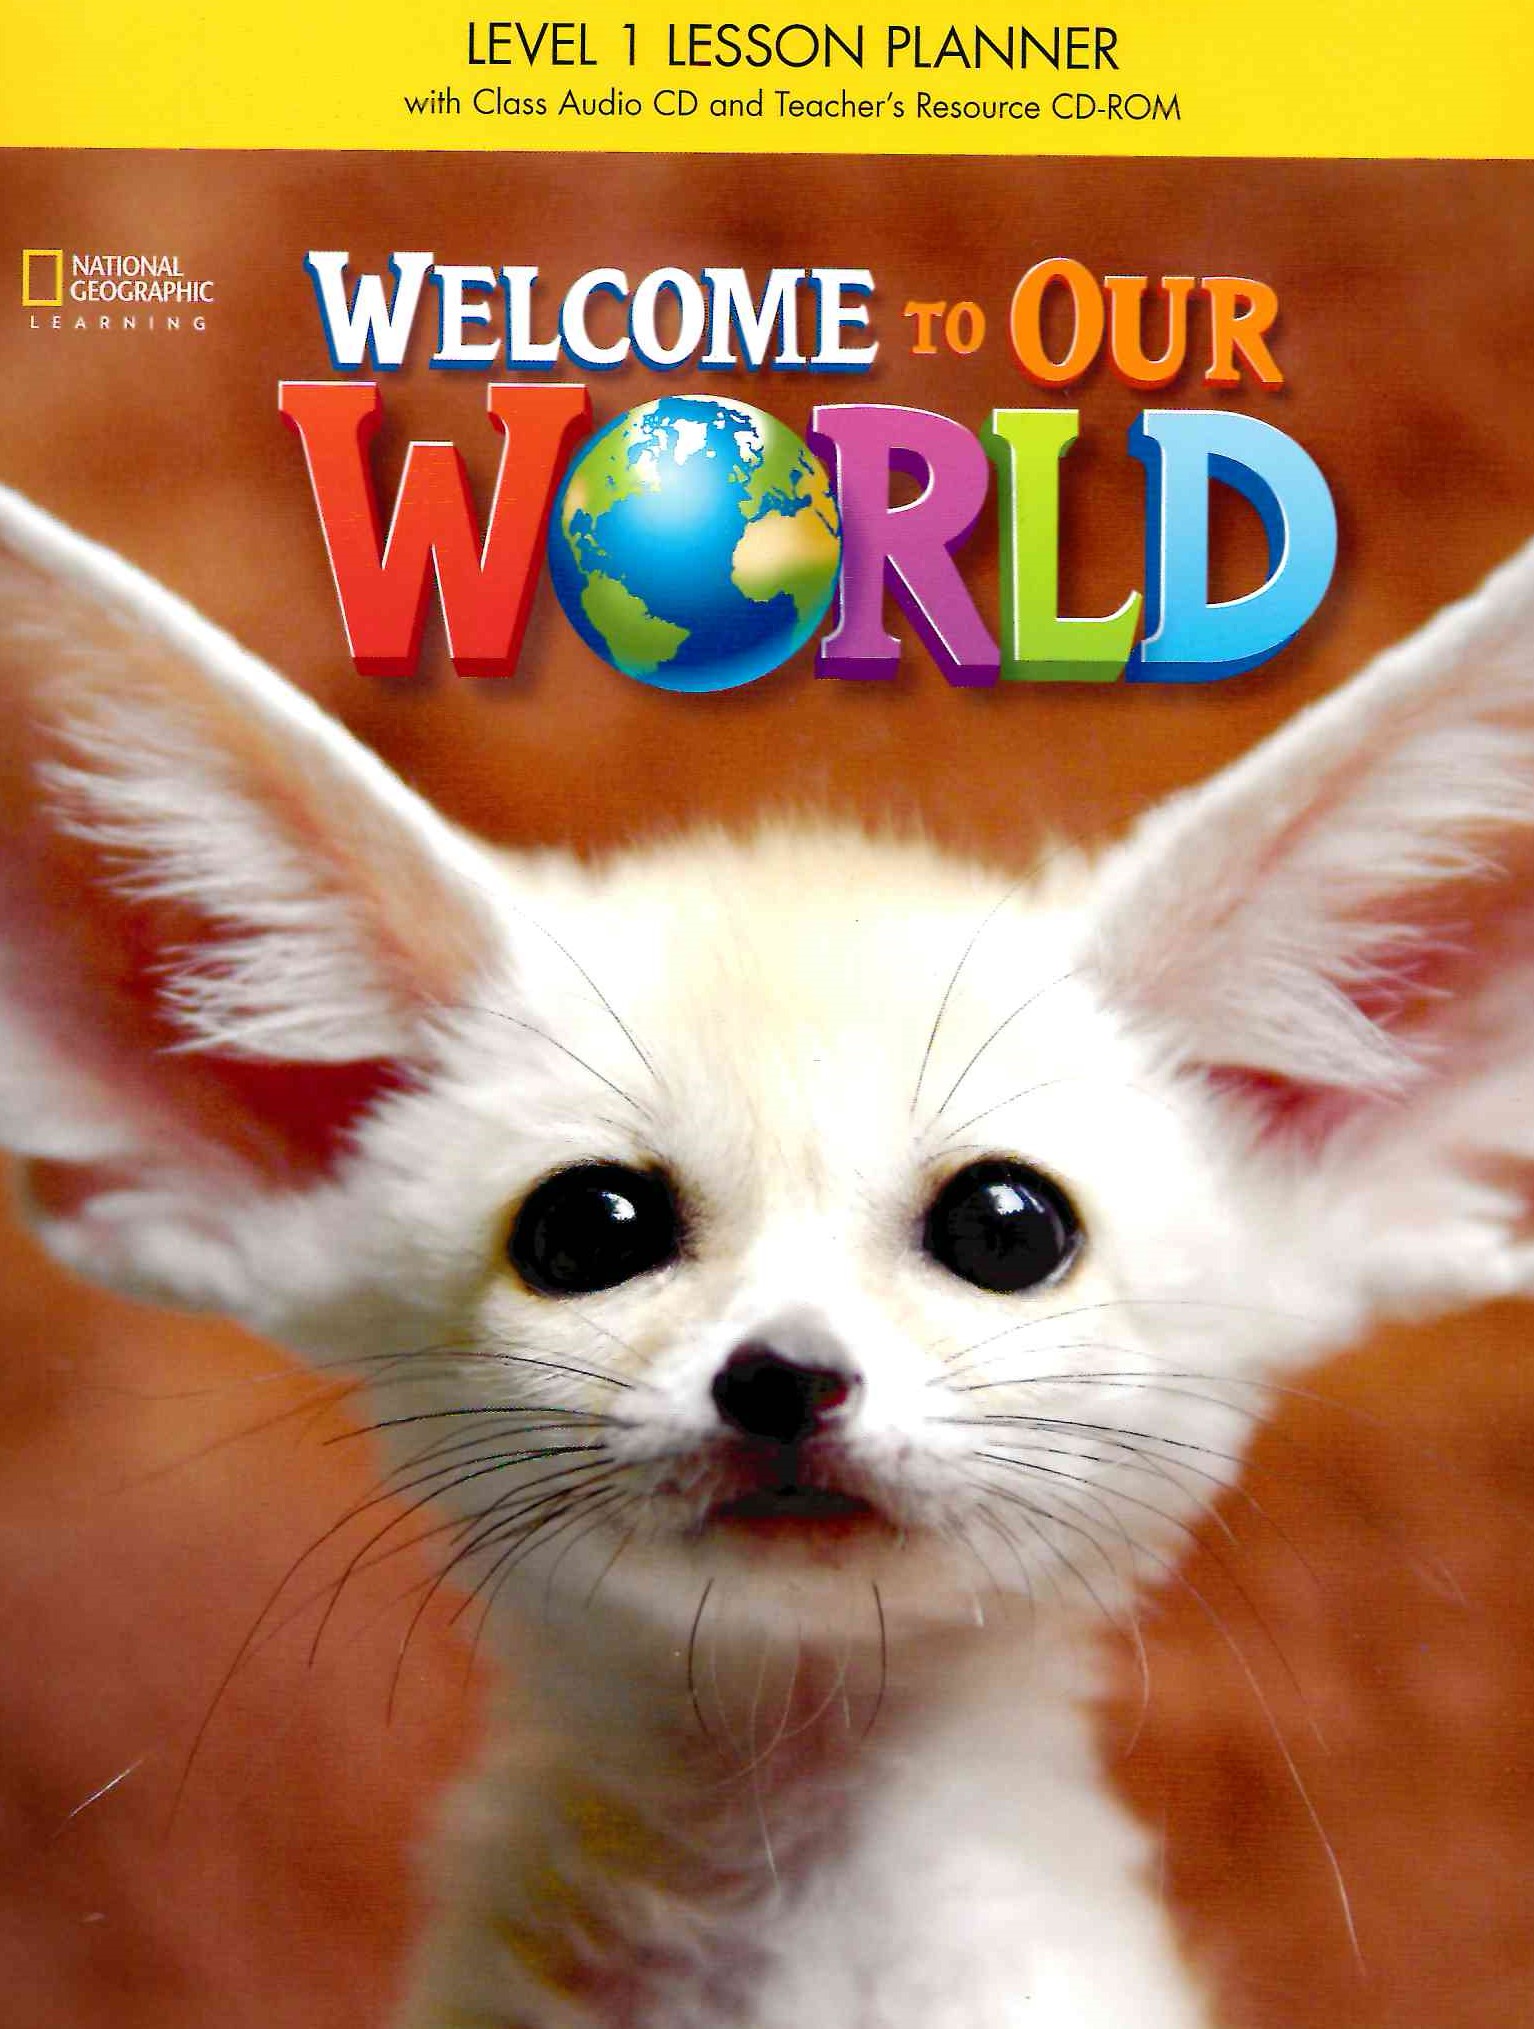 Welcome to Our World 1 Lesson Planner + Class CD + CD-ROM / Книга для учителя